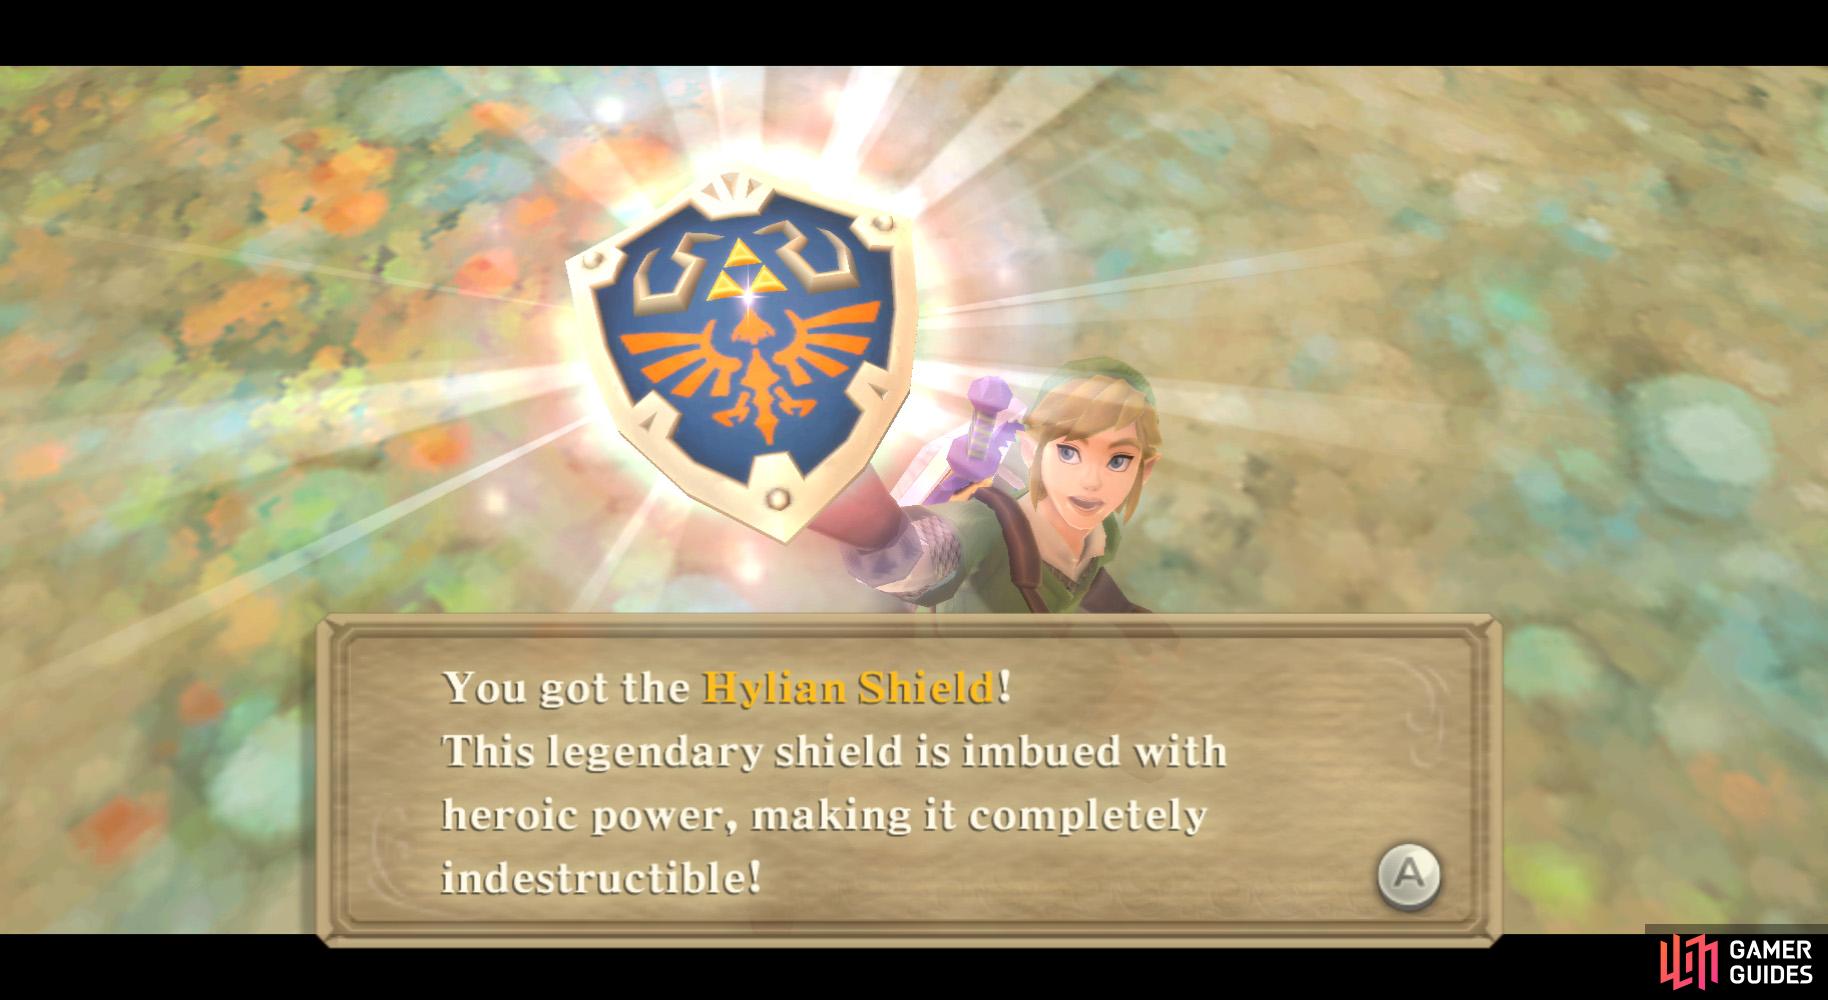 Zelda fans may remember this shield!